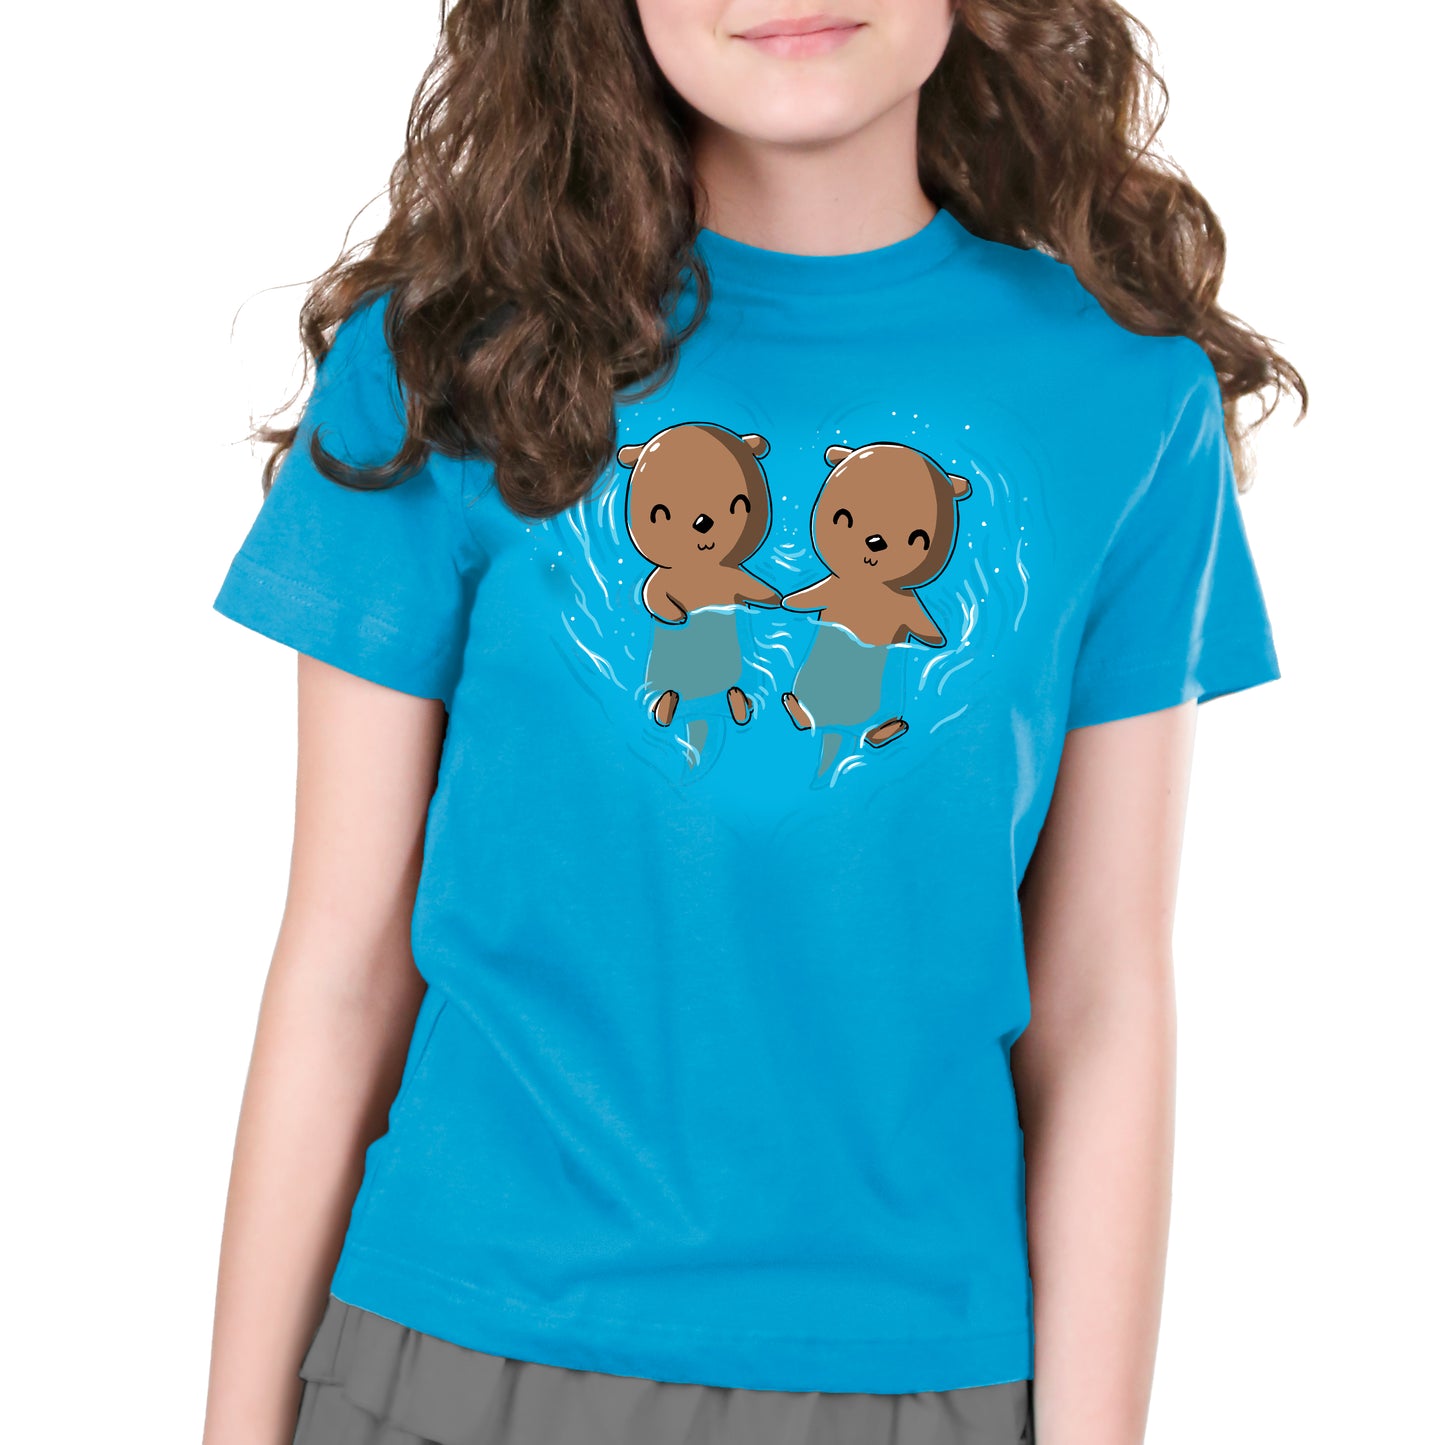 A girl wearing a cobalt blue cotton t-shirt with two My Otter Half otters on it from TeeTurtle.